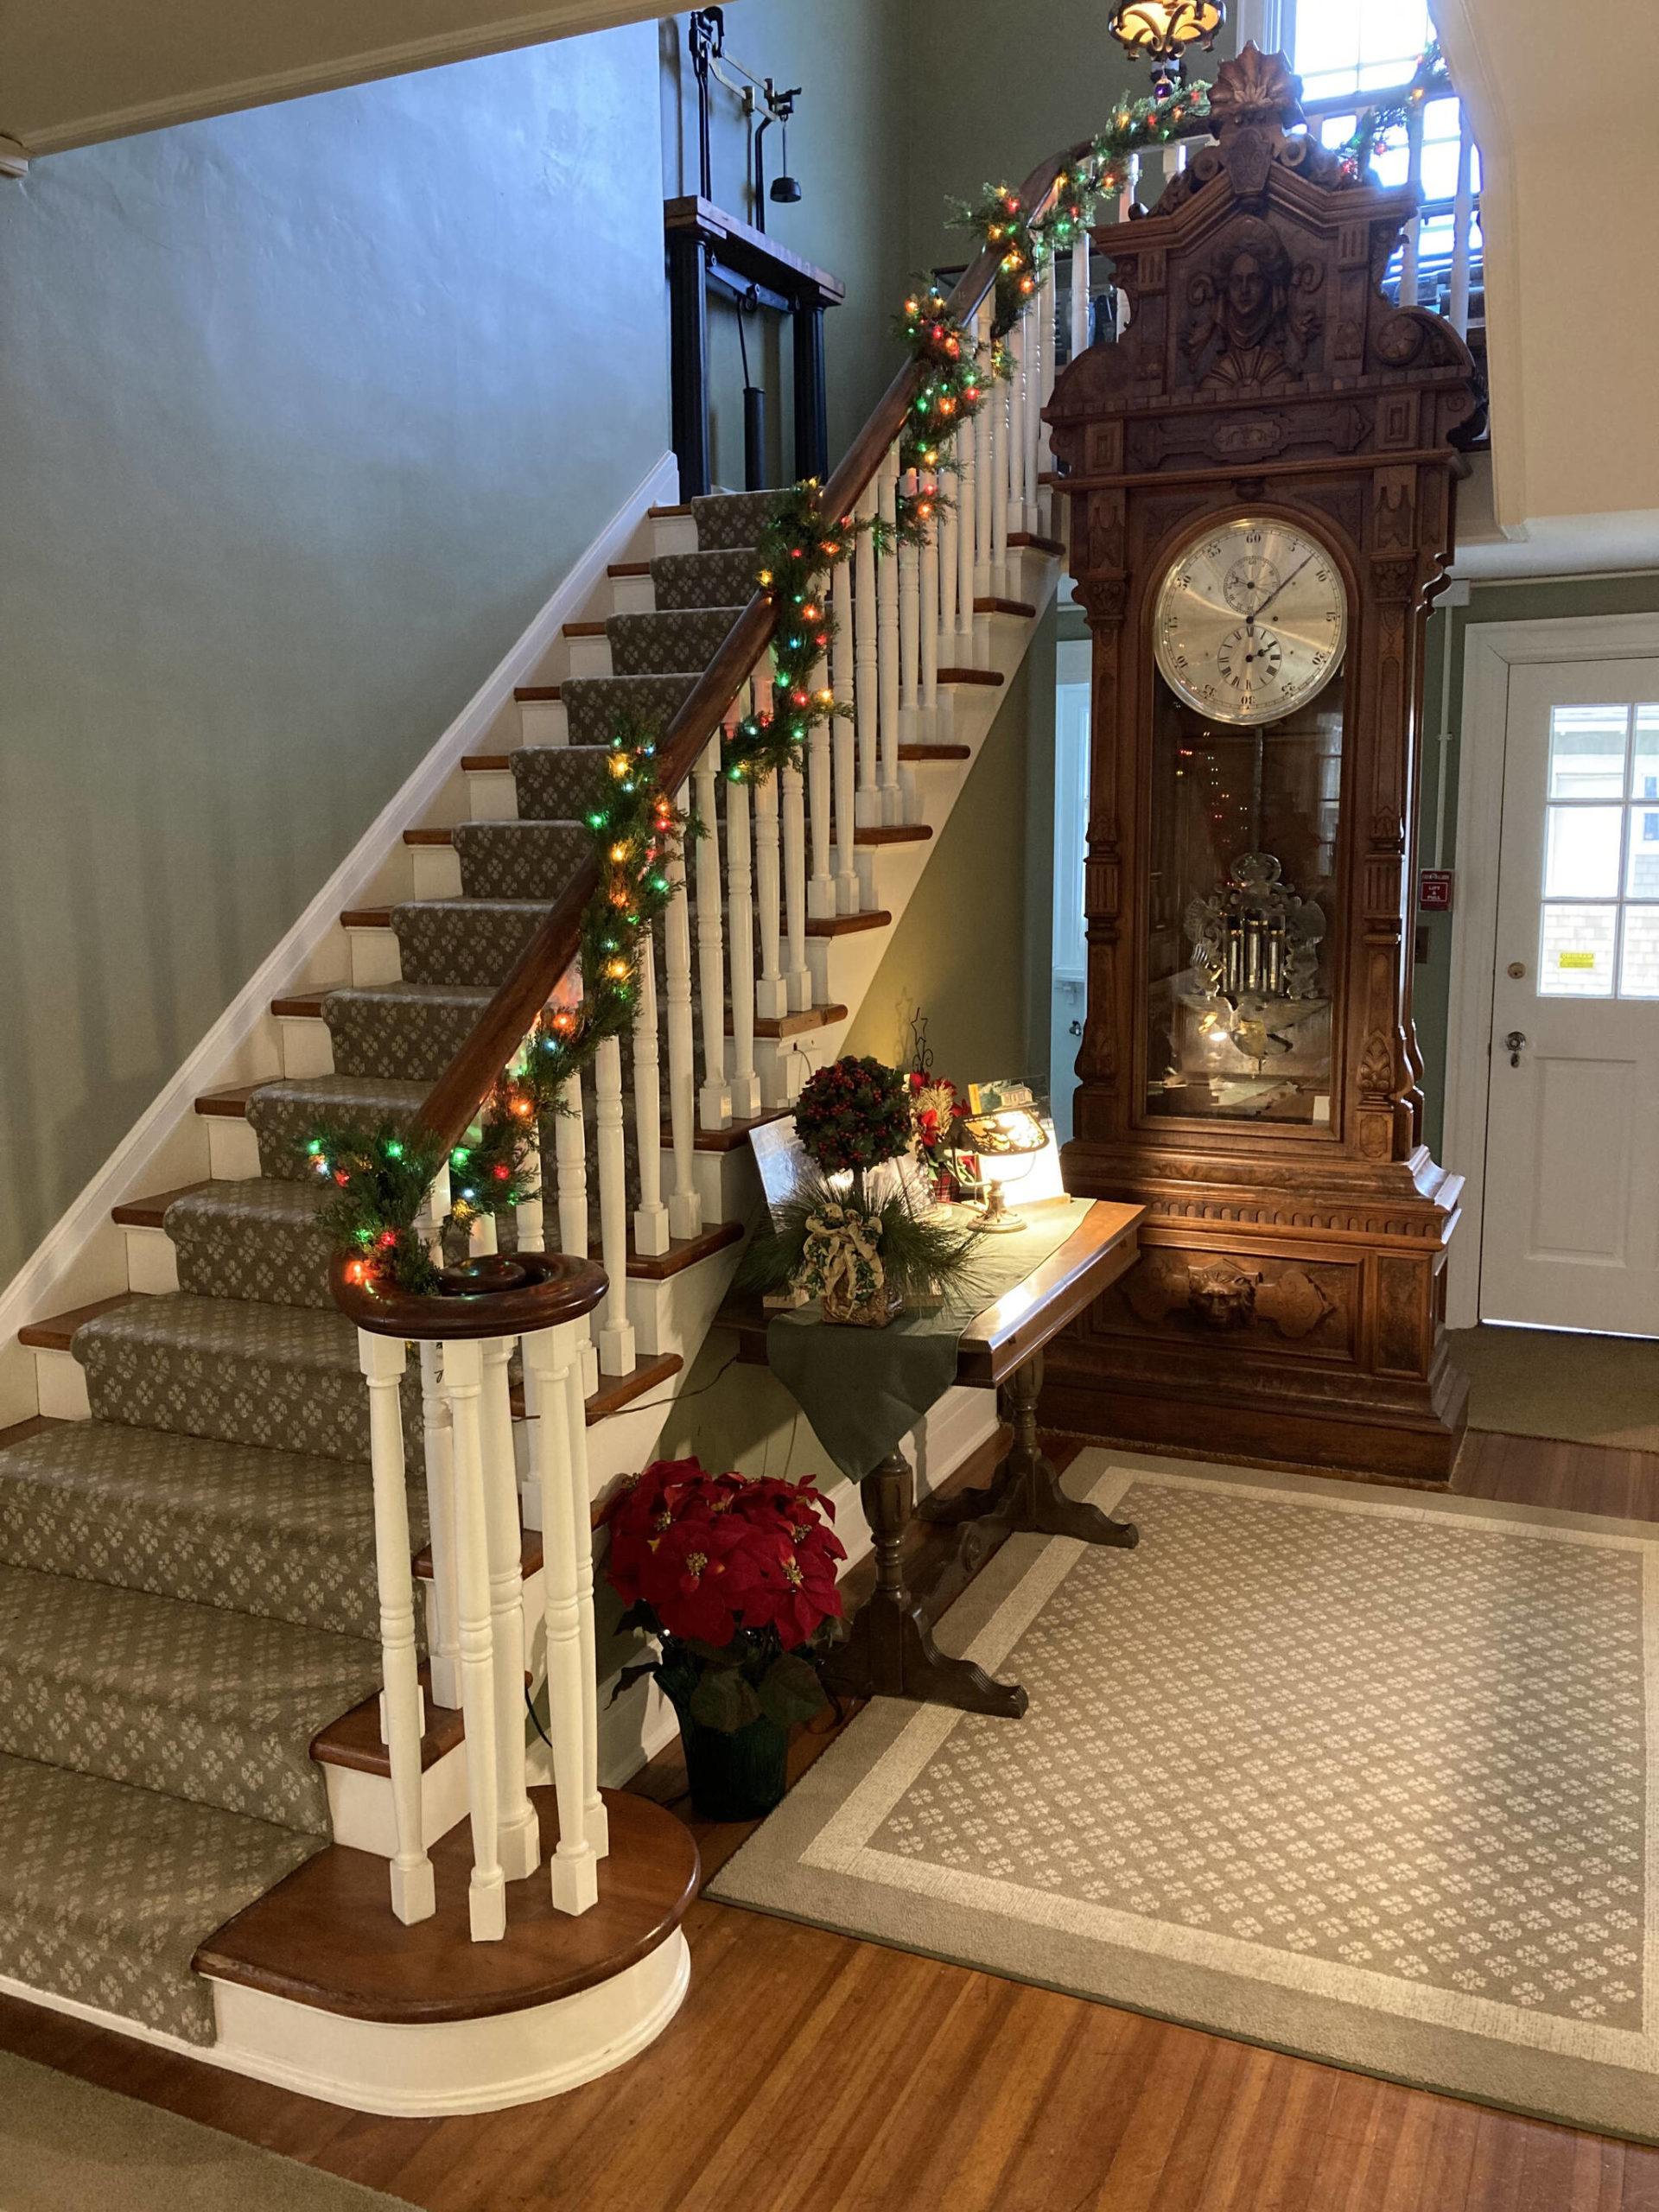 Polson Museum's foyer decorated for the holiday season.

Photo submitted by John Larson